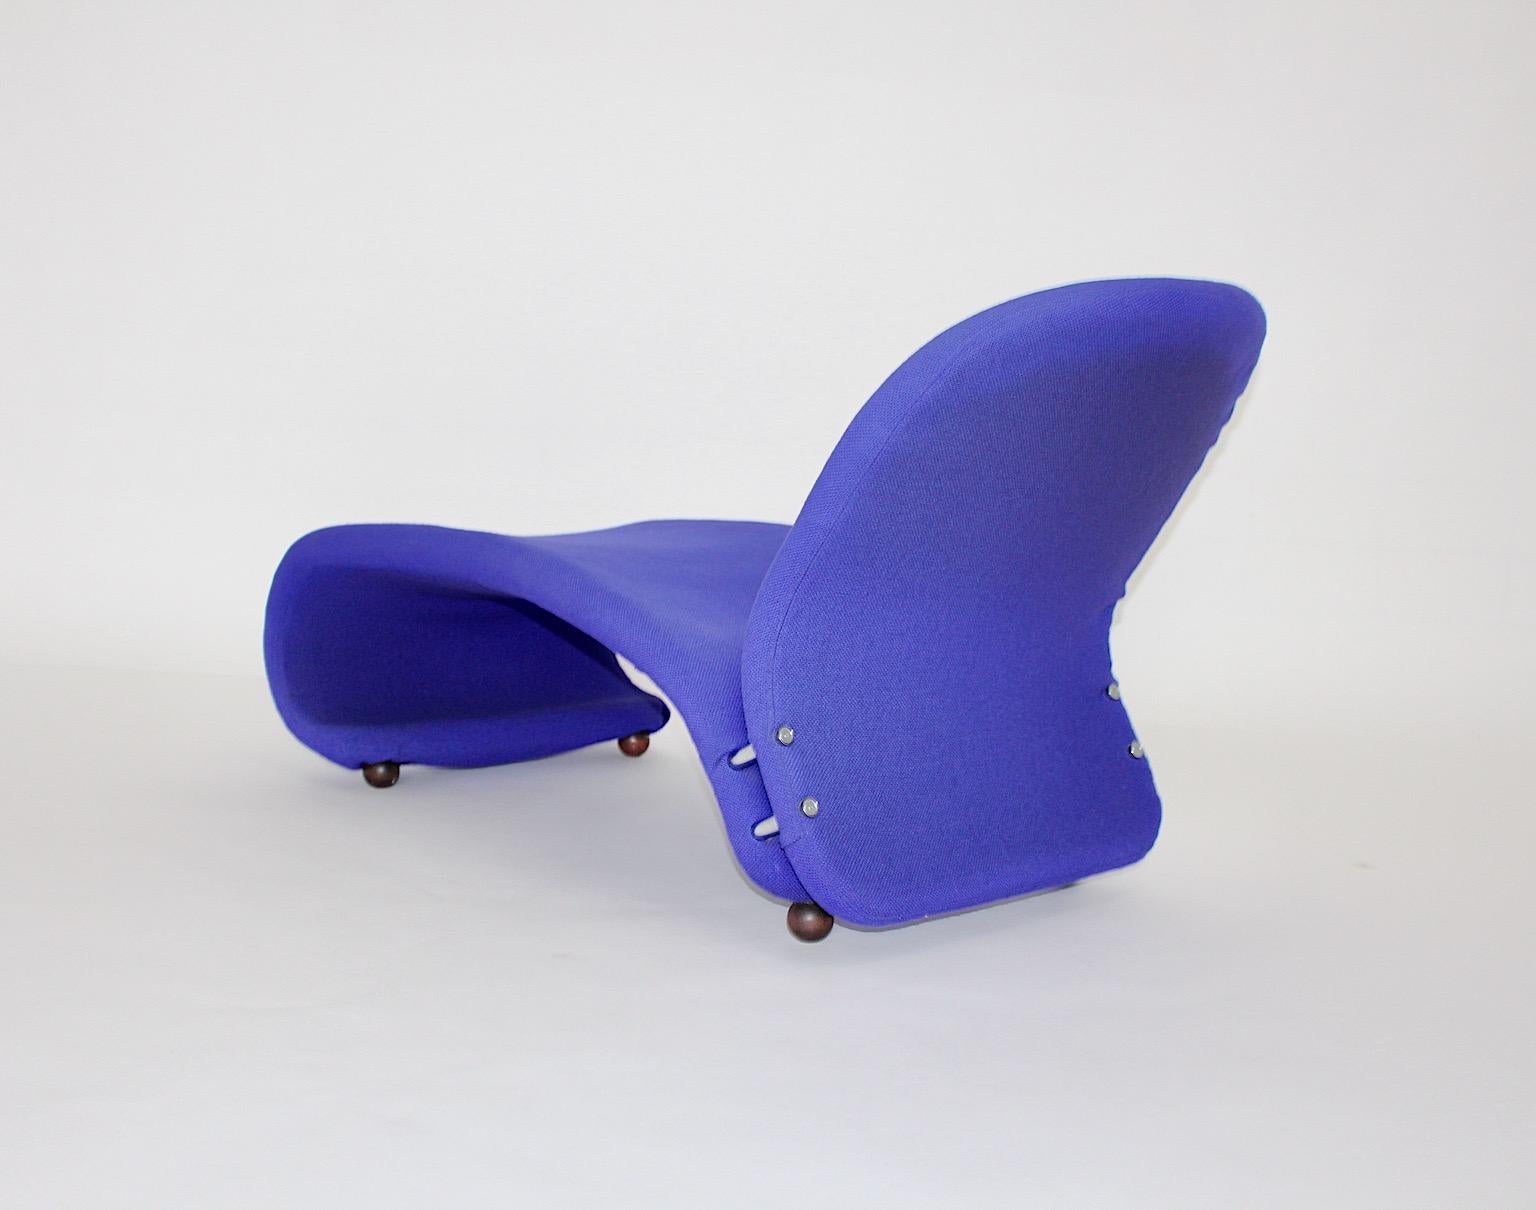 Space Age vintage organic anthropomorph chaise longue or daybed by Verner Panton for 
Fritz Hansen 1962/63 Denmark Polstermöbelreihe Kleinserie.
A wonderful iconic chaise longue in bold blue color with upholstery designed by Verner Panton 1962 /